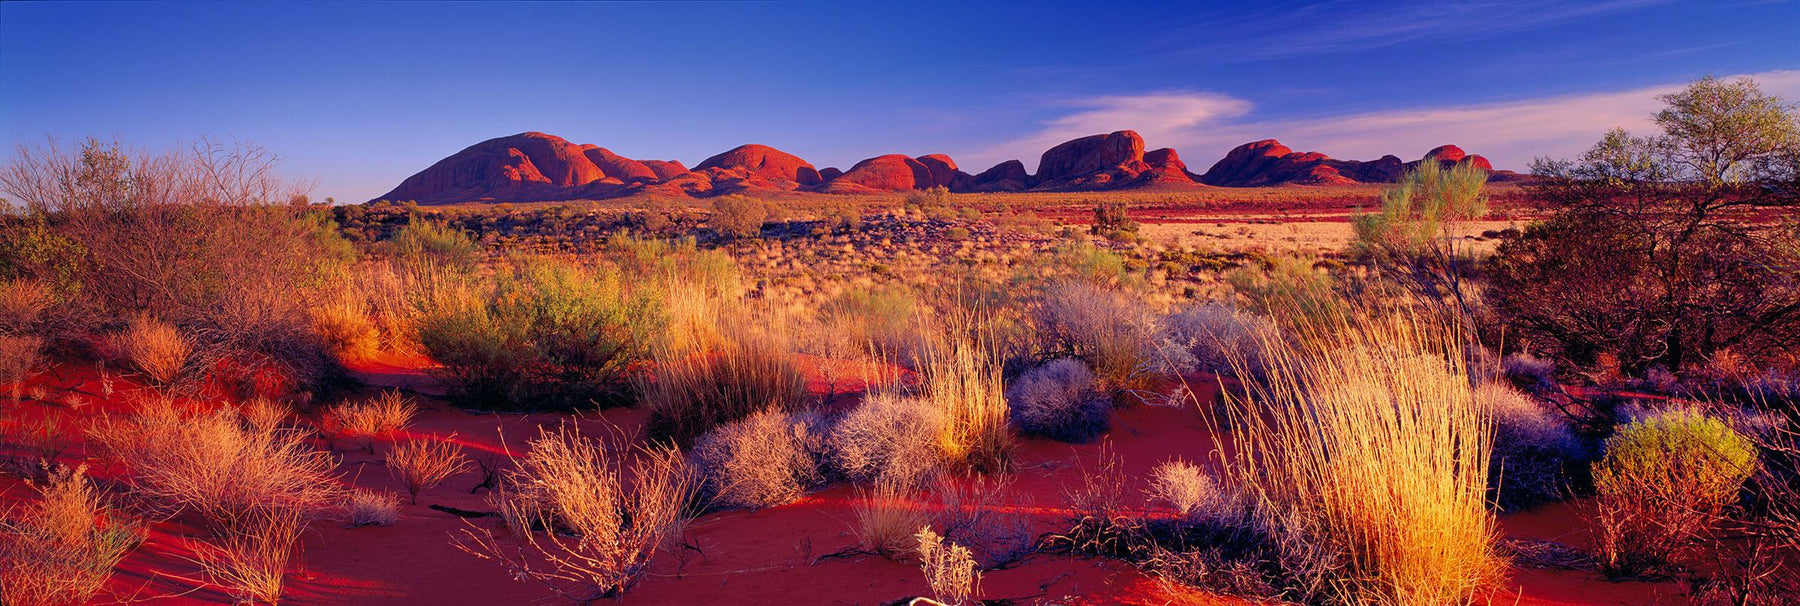 Brush filled desert with the stone formations of Kata Tjuta National Park Australia in the background